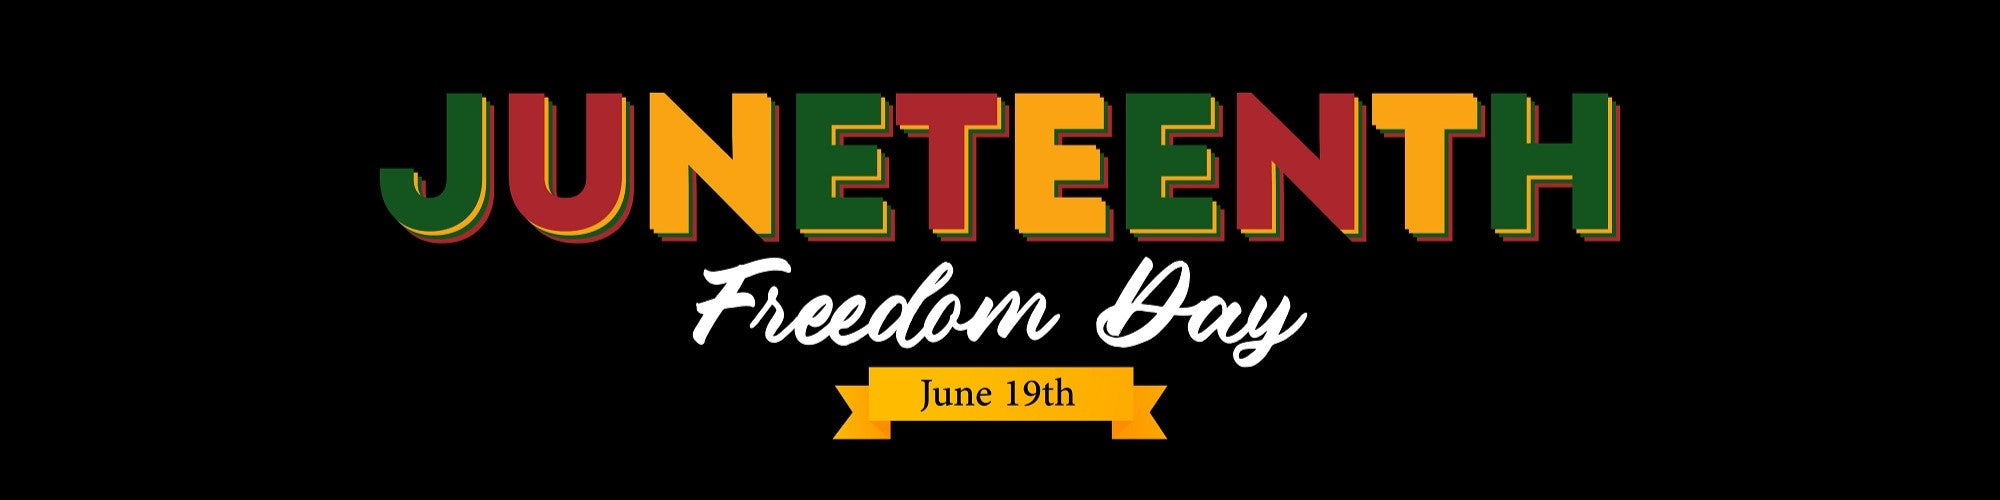 Juneteenth in Pop Culture: Films, Books, and Music That Celebrate Freedom